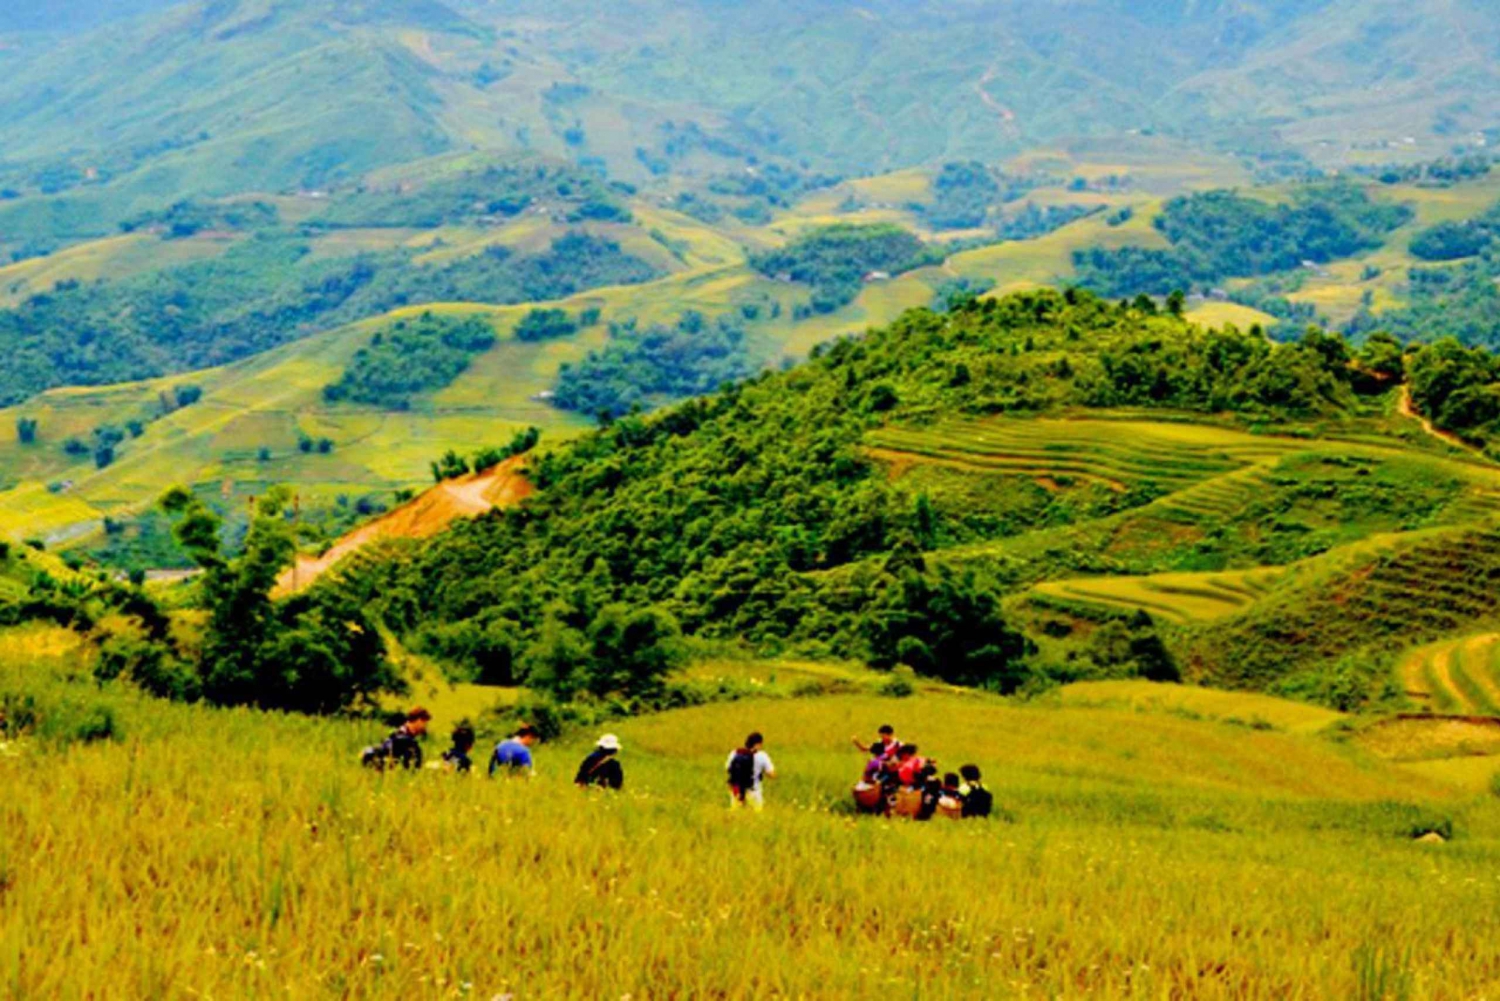 2-Day Overnight Sapa Tour by Bus from Hanoi